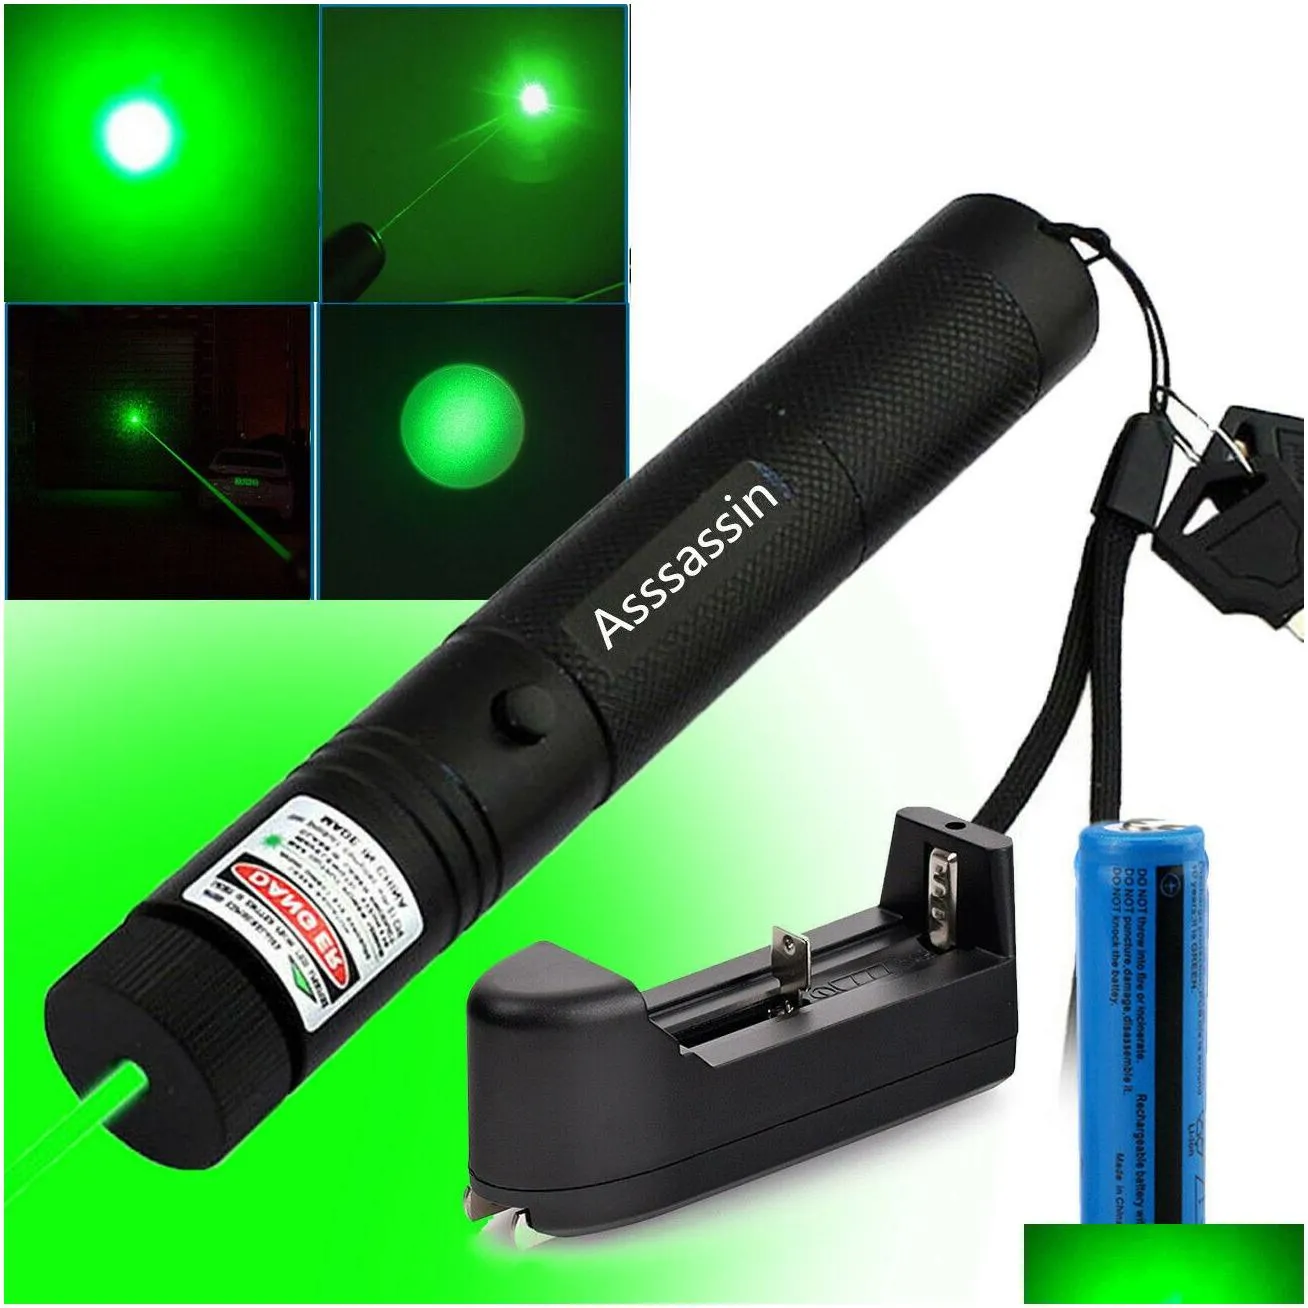 10mile military green laser pointer pen astronomy 532nm powerful cat toy adjustable focus add 18650 batteryadduniversal smart 